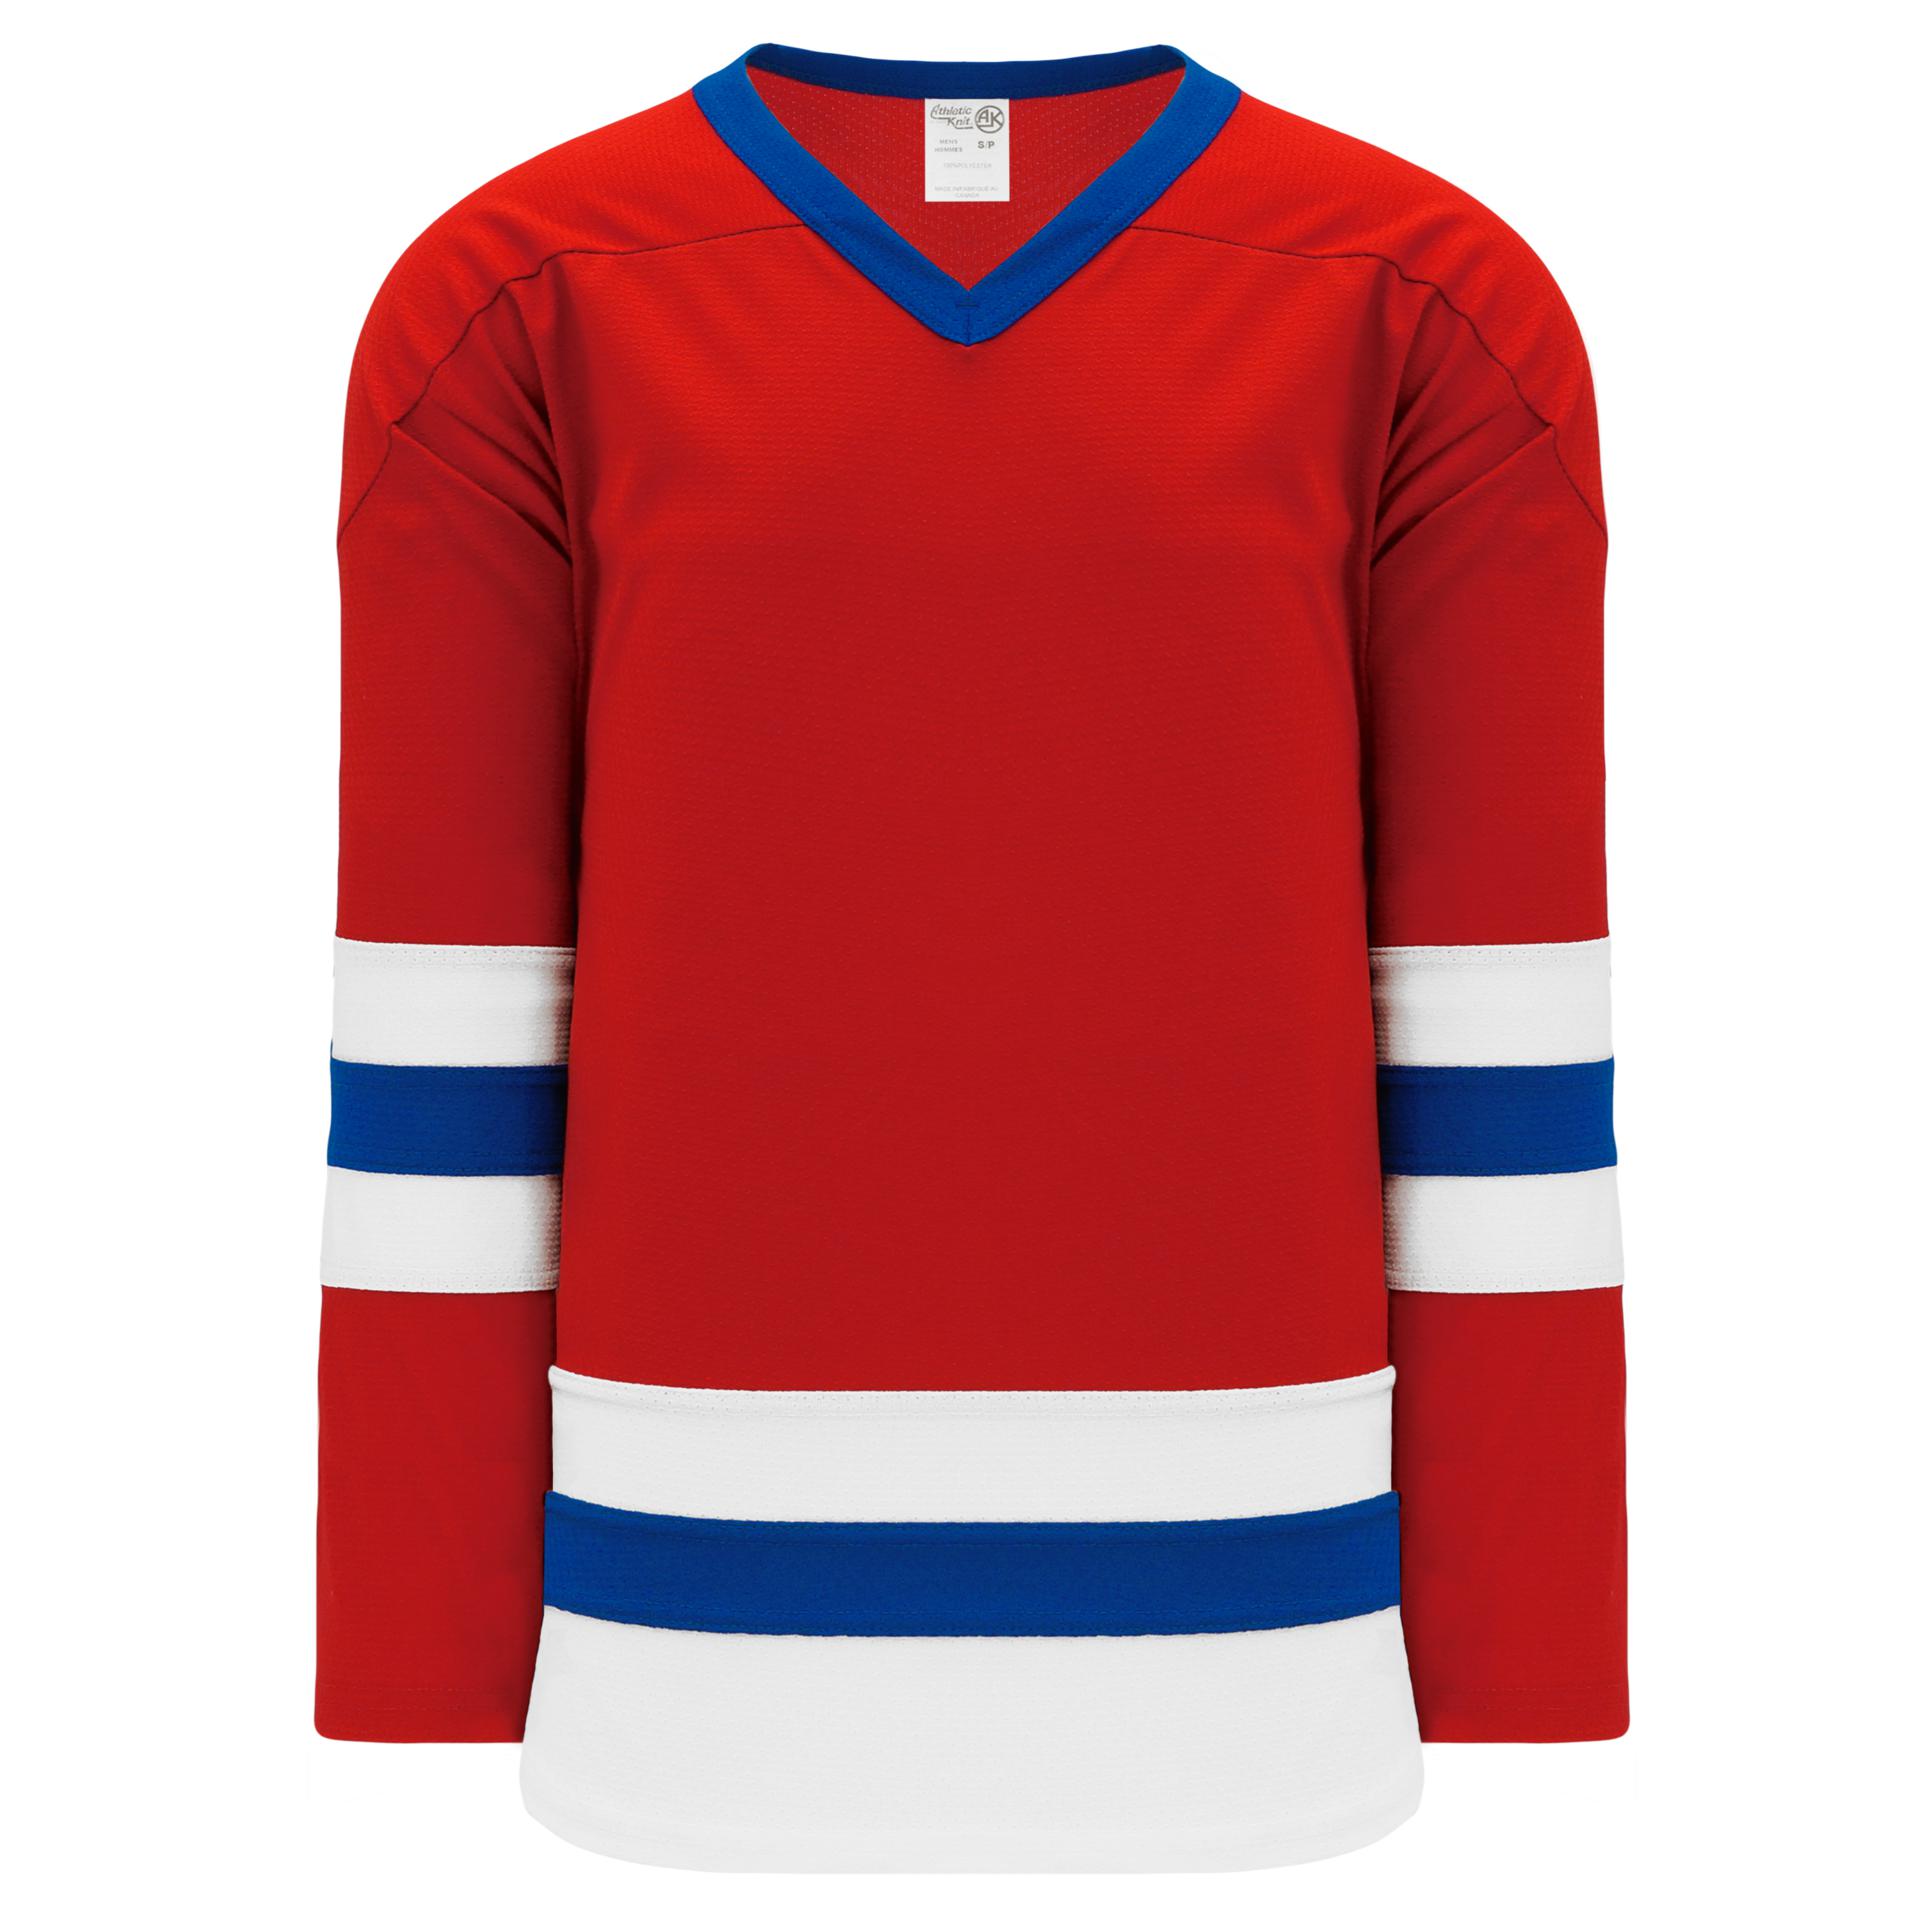 Red Blue and White Stripe Sublimated Custom Hockey Jerseys | YoungSpeeds